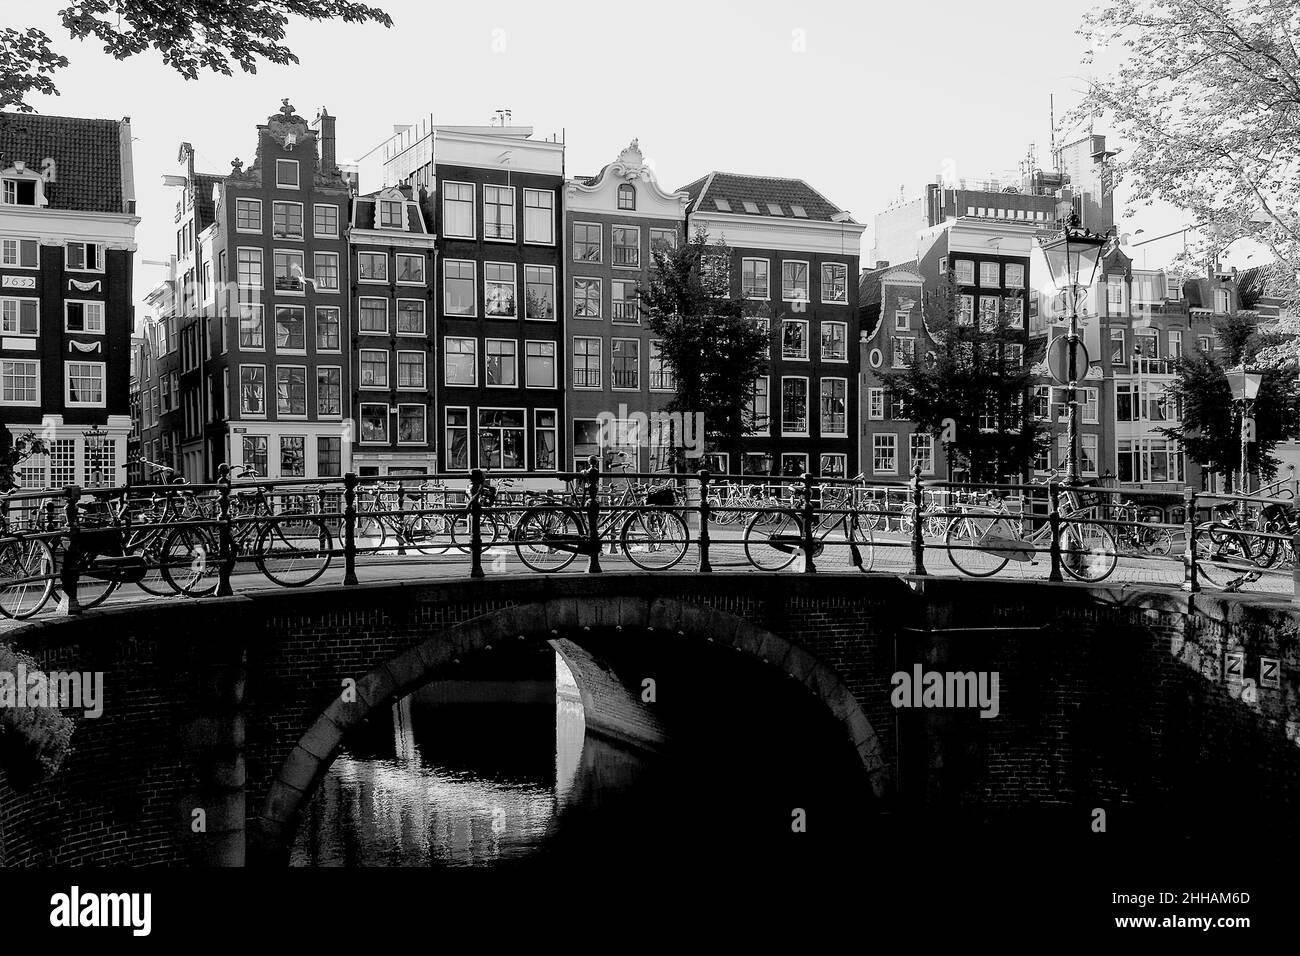 Black and white photograph of a canal, bridge, bicycles and historic buildings, West Canal Ring, Amsterdam, Holland, Europe, 2016. Stock Photo